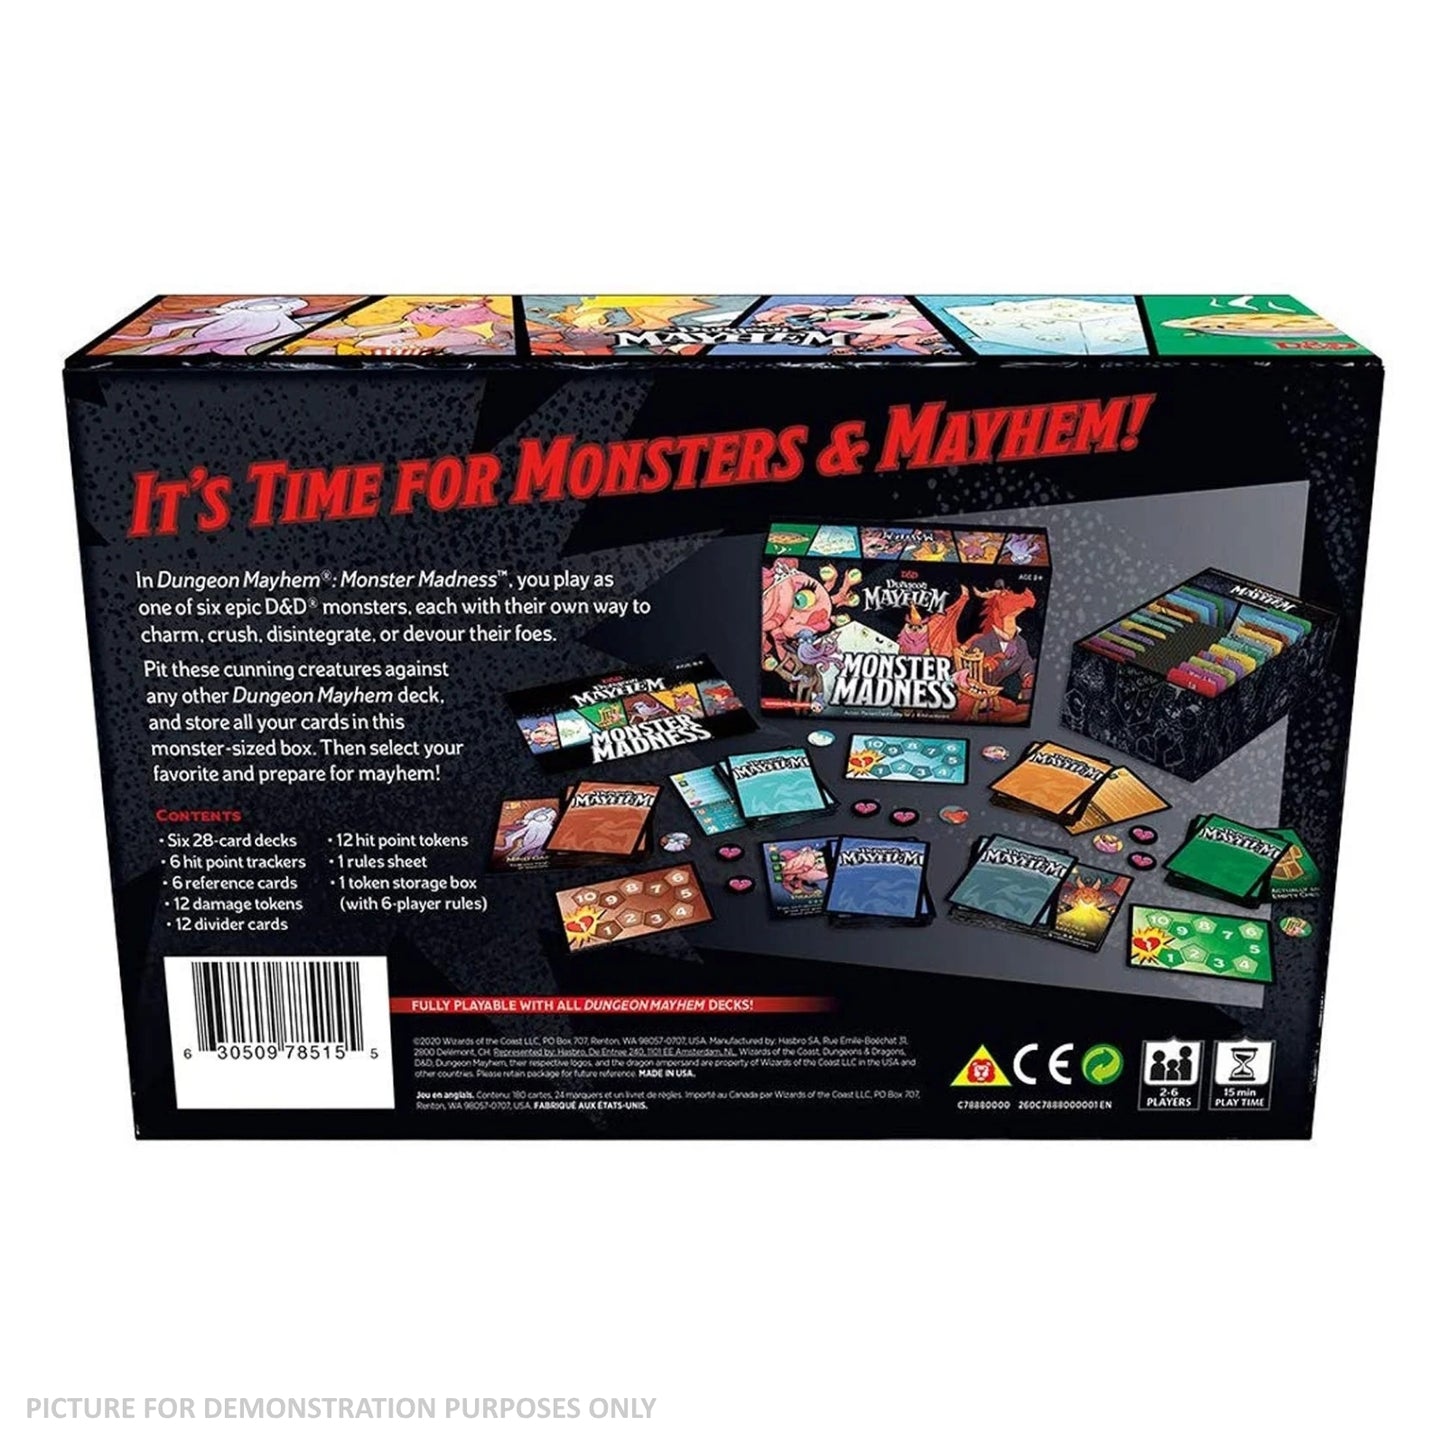 Dungeons & Dragons Dungeon Mayhem Monster Madness Deluxe Expansion